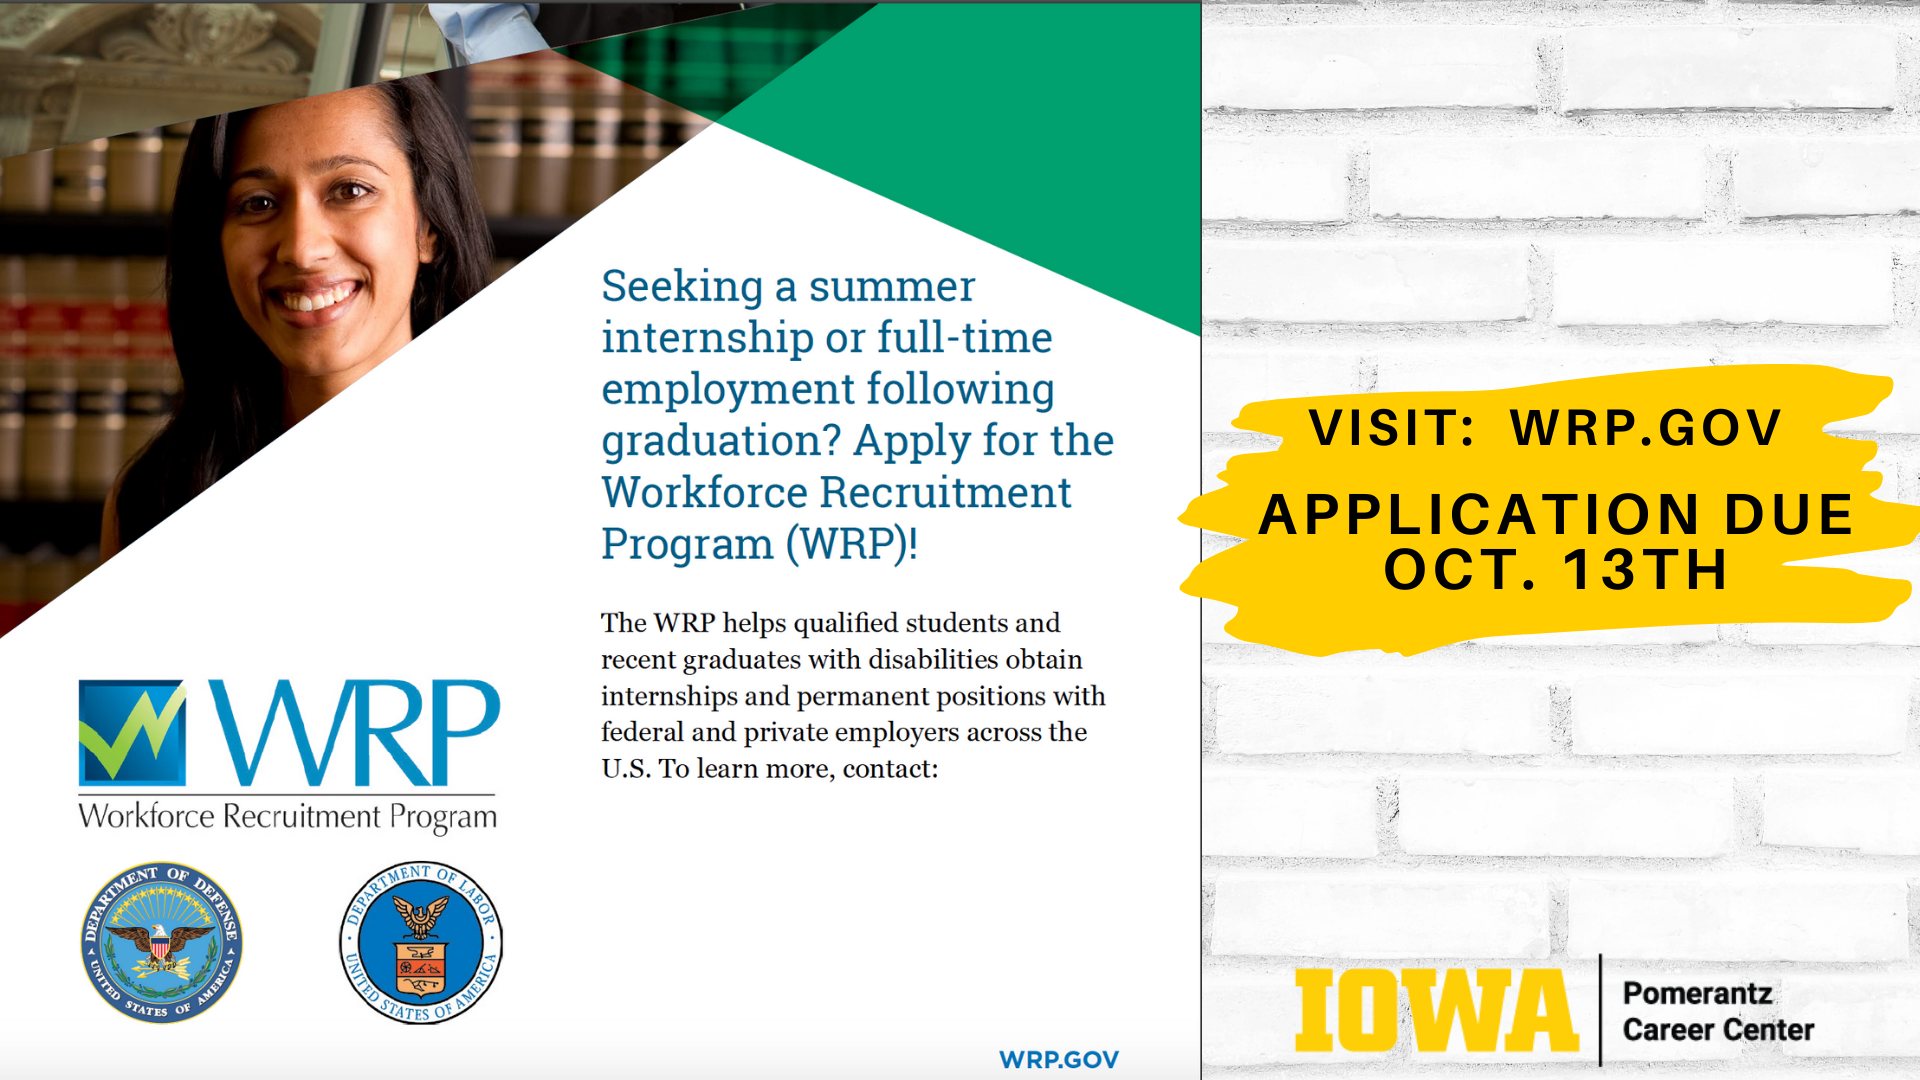 The WRP helps qualified students and recent graduates with disabilities obtain internships and permanent positions with federal and private employers across the U.S. visit wrp.gov application due October 13th Contact Pomerantz Career Center with Questions 